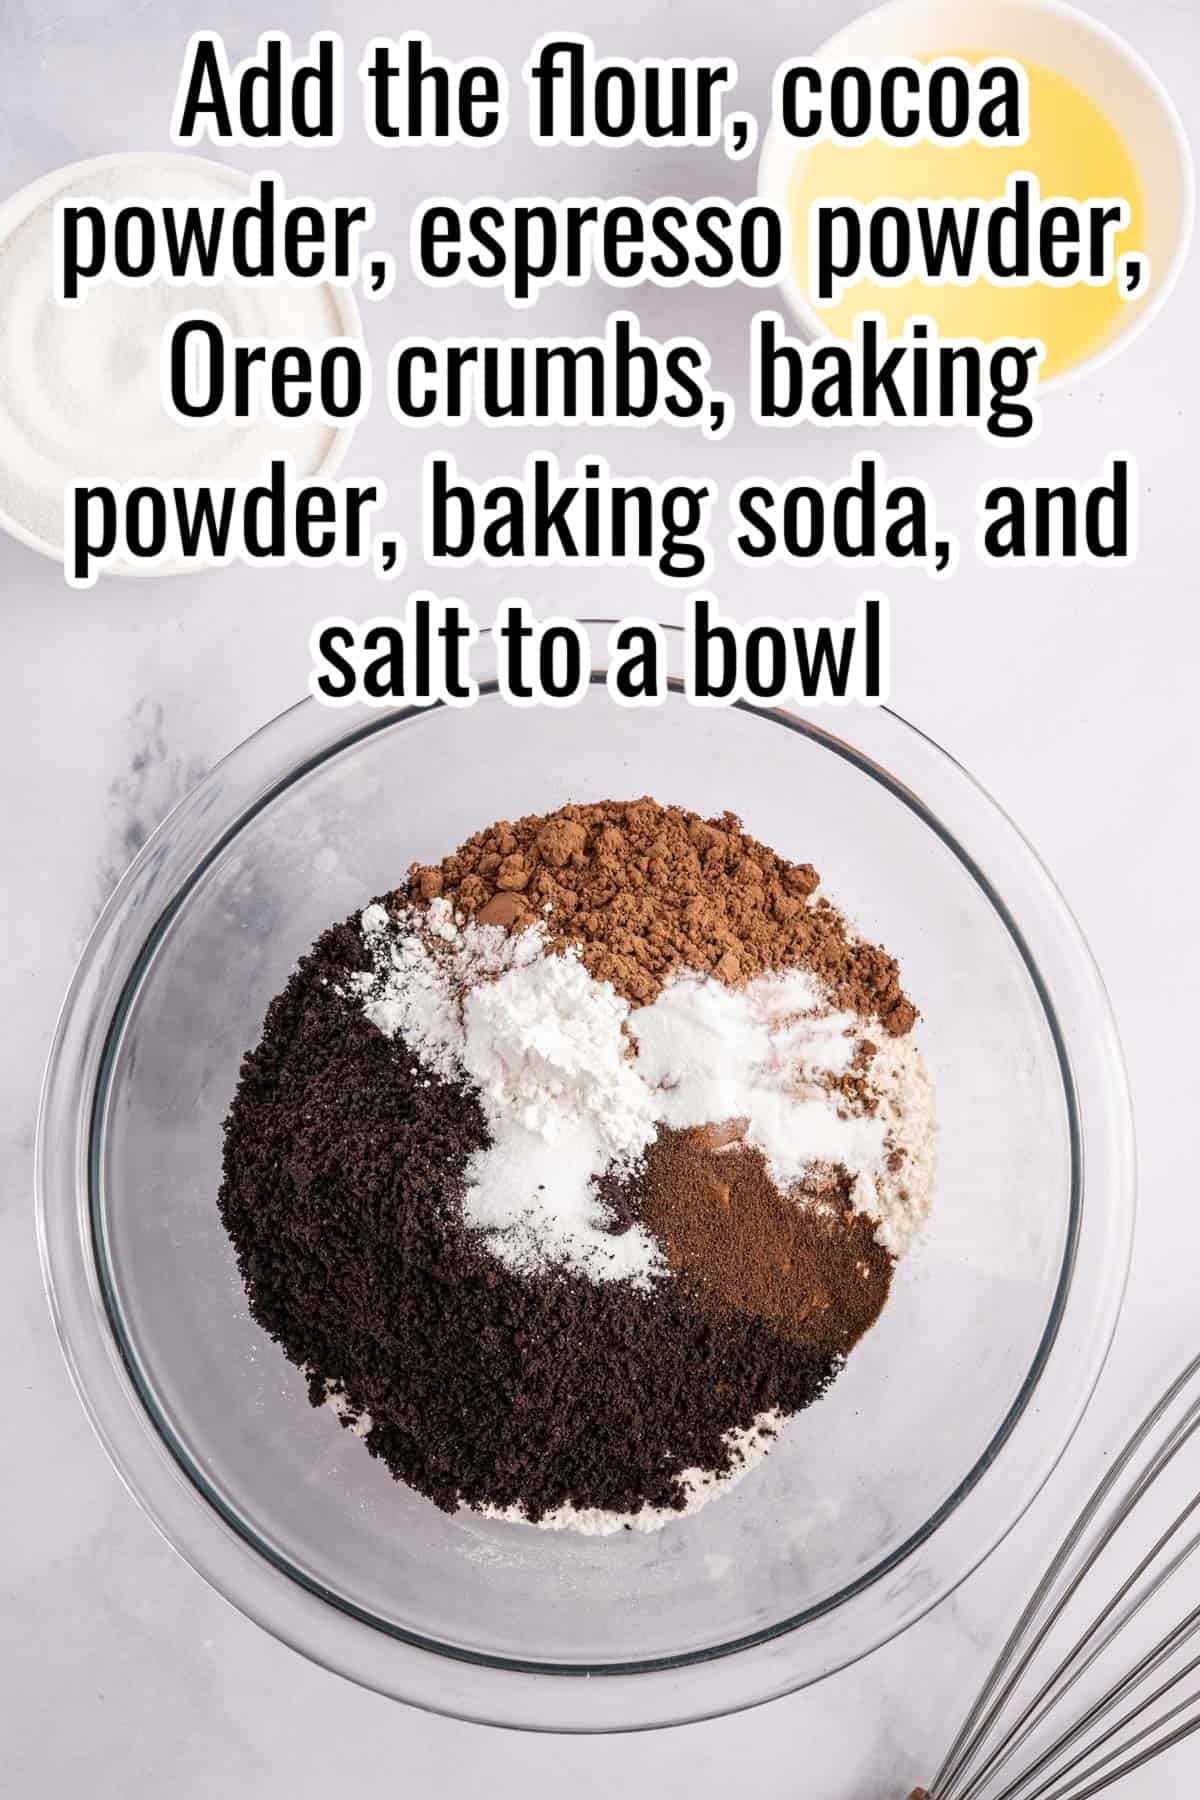 A bowl of ingredients with the words Add the flour, cocoa powder, espresso powder, baking soda and salt overlaid in text.